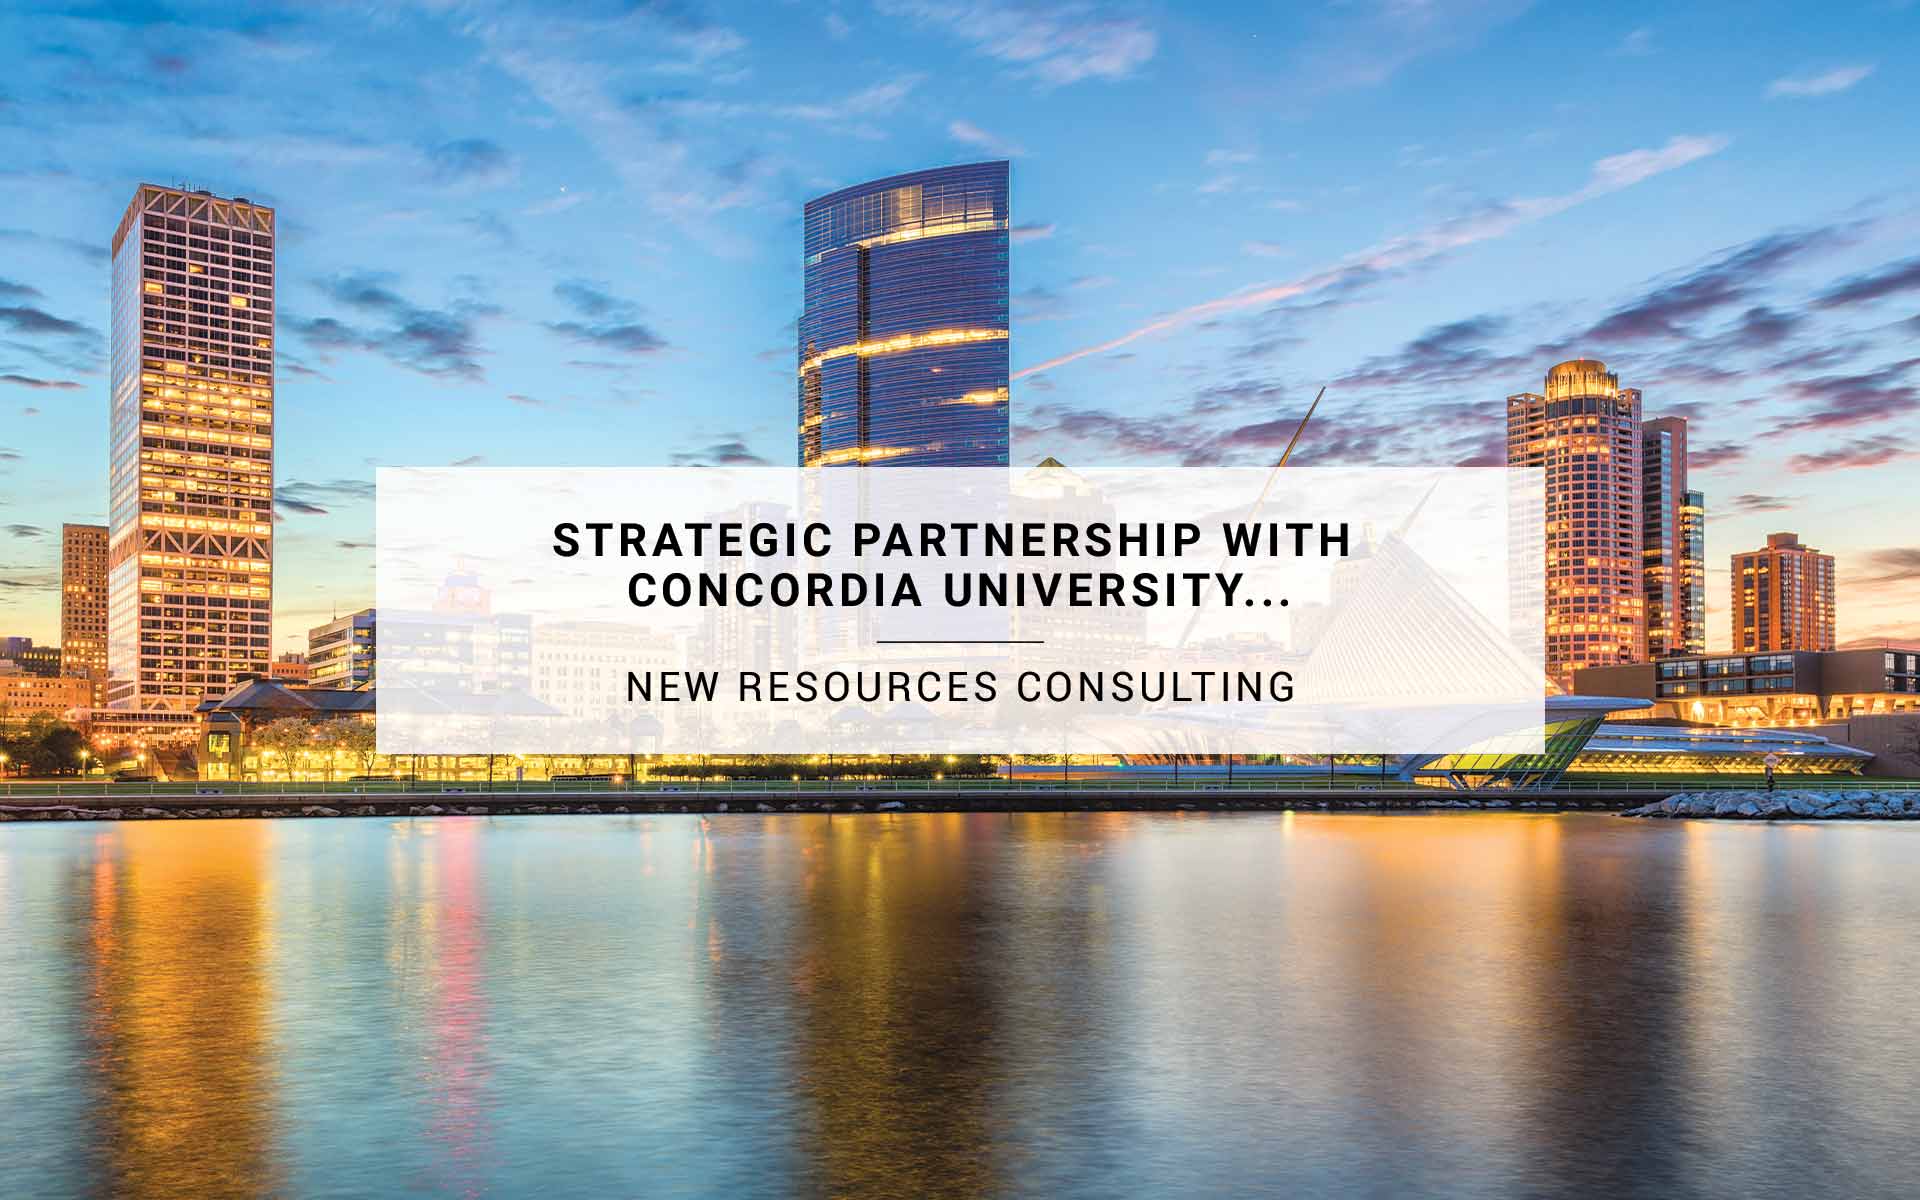 New Resources Consulting Announces Strategic Partnership with Concordia University